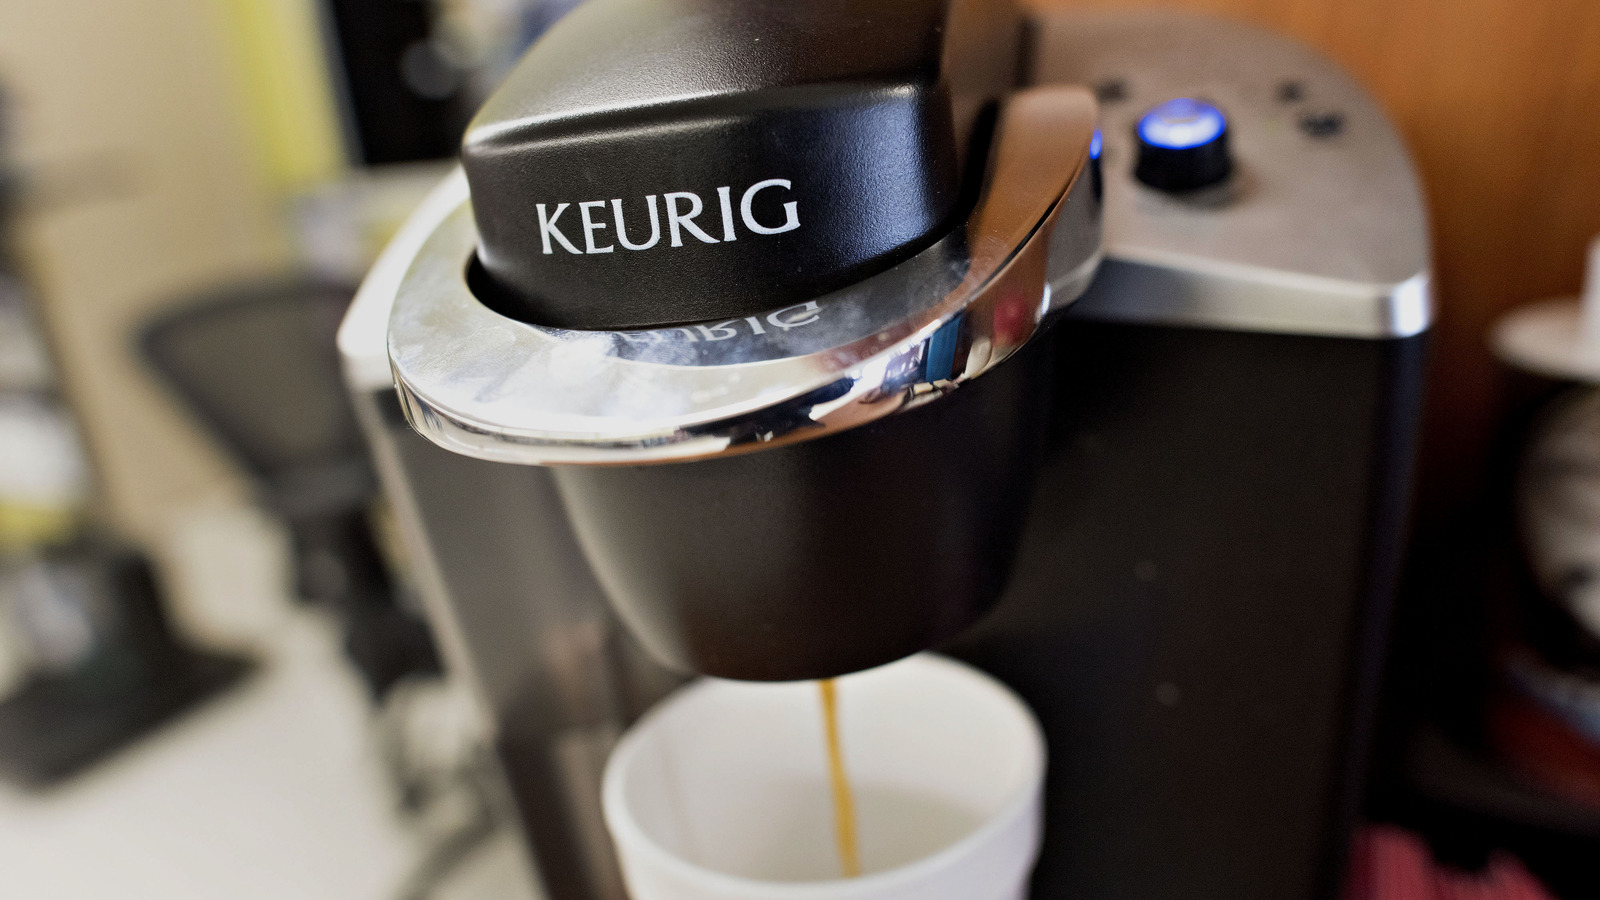 https://www.mashed.com/img/gallery/how-to-get-more-flavor-from-your-coffee-pods-other-keurig-hacks/l-intro-1688138740.jpg